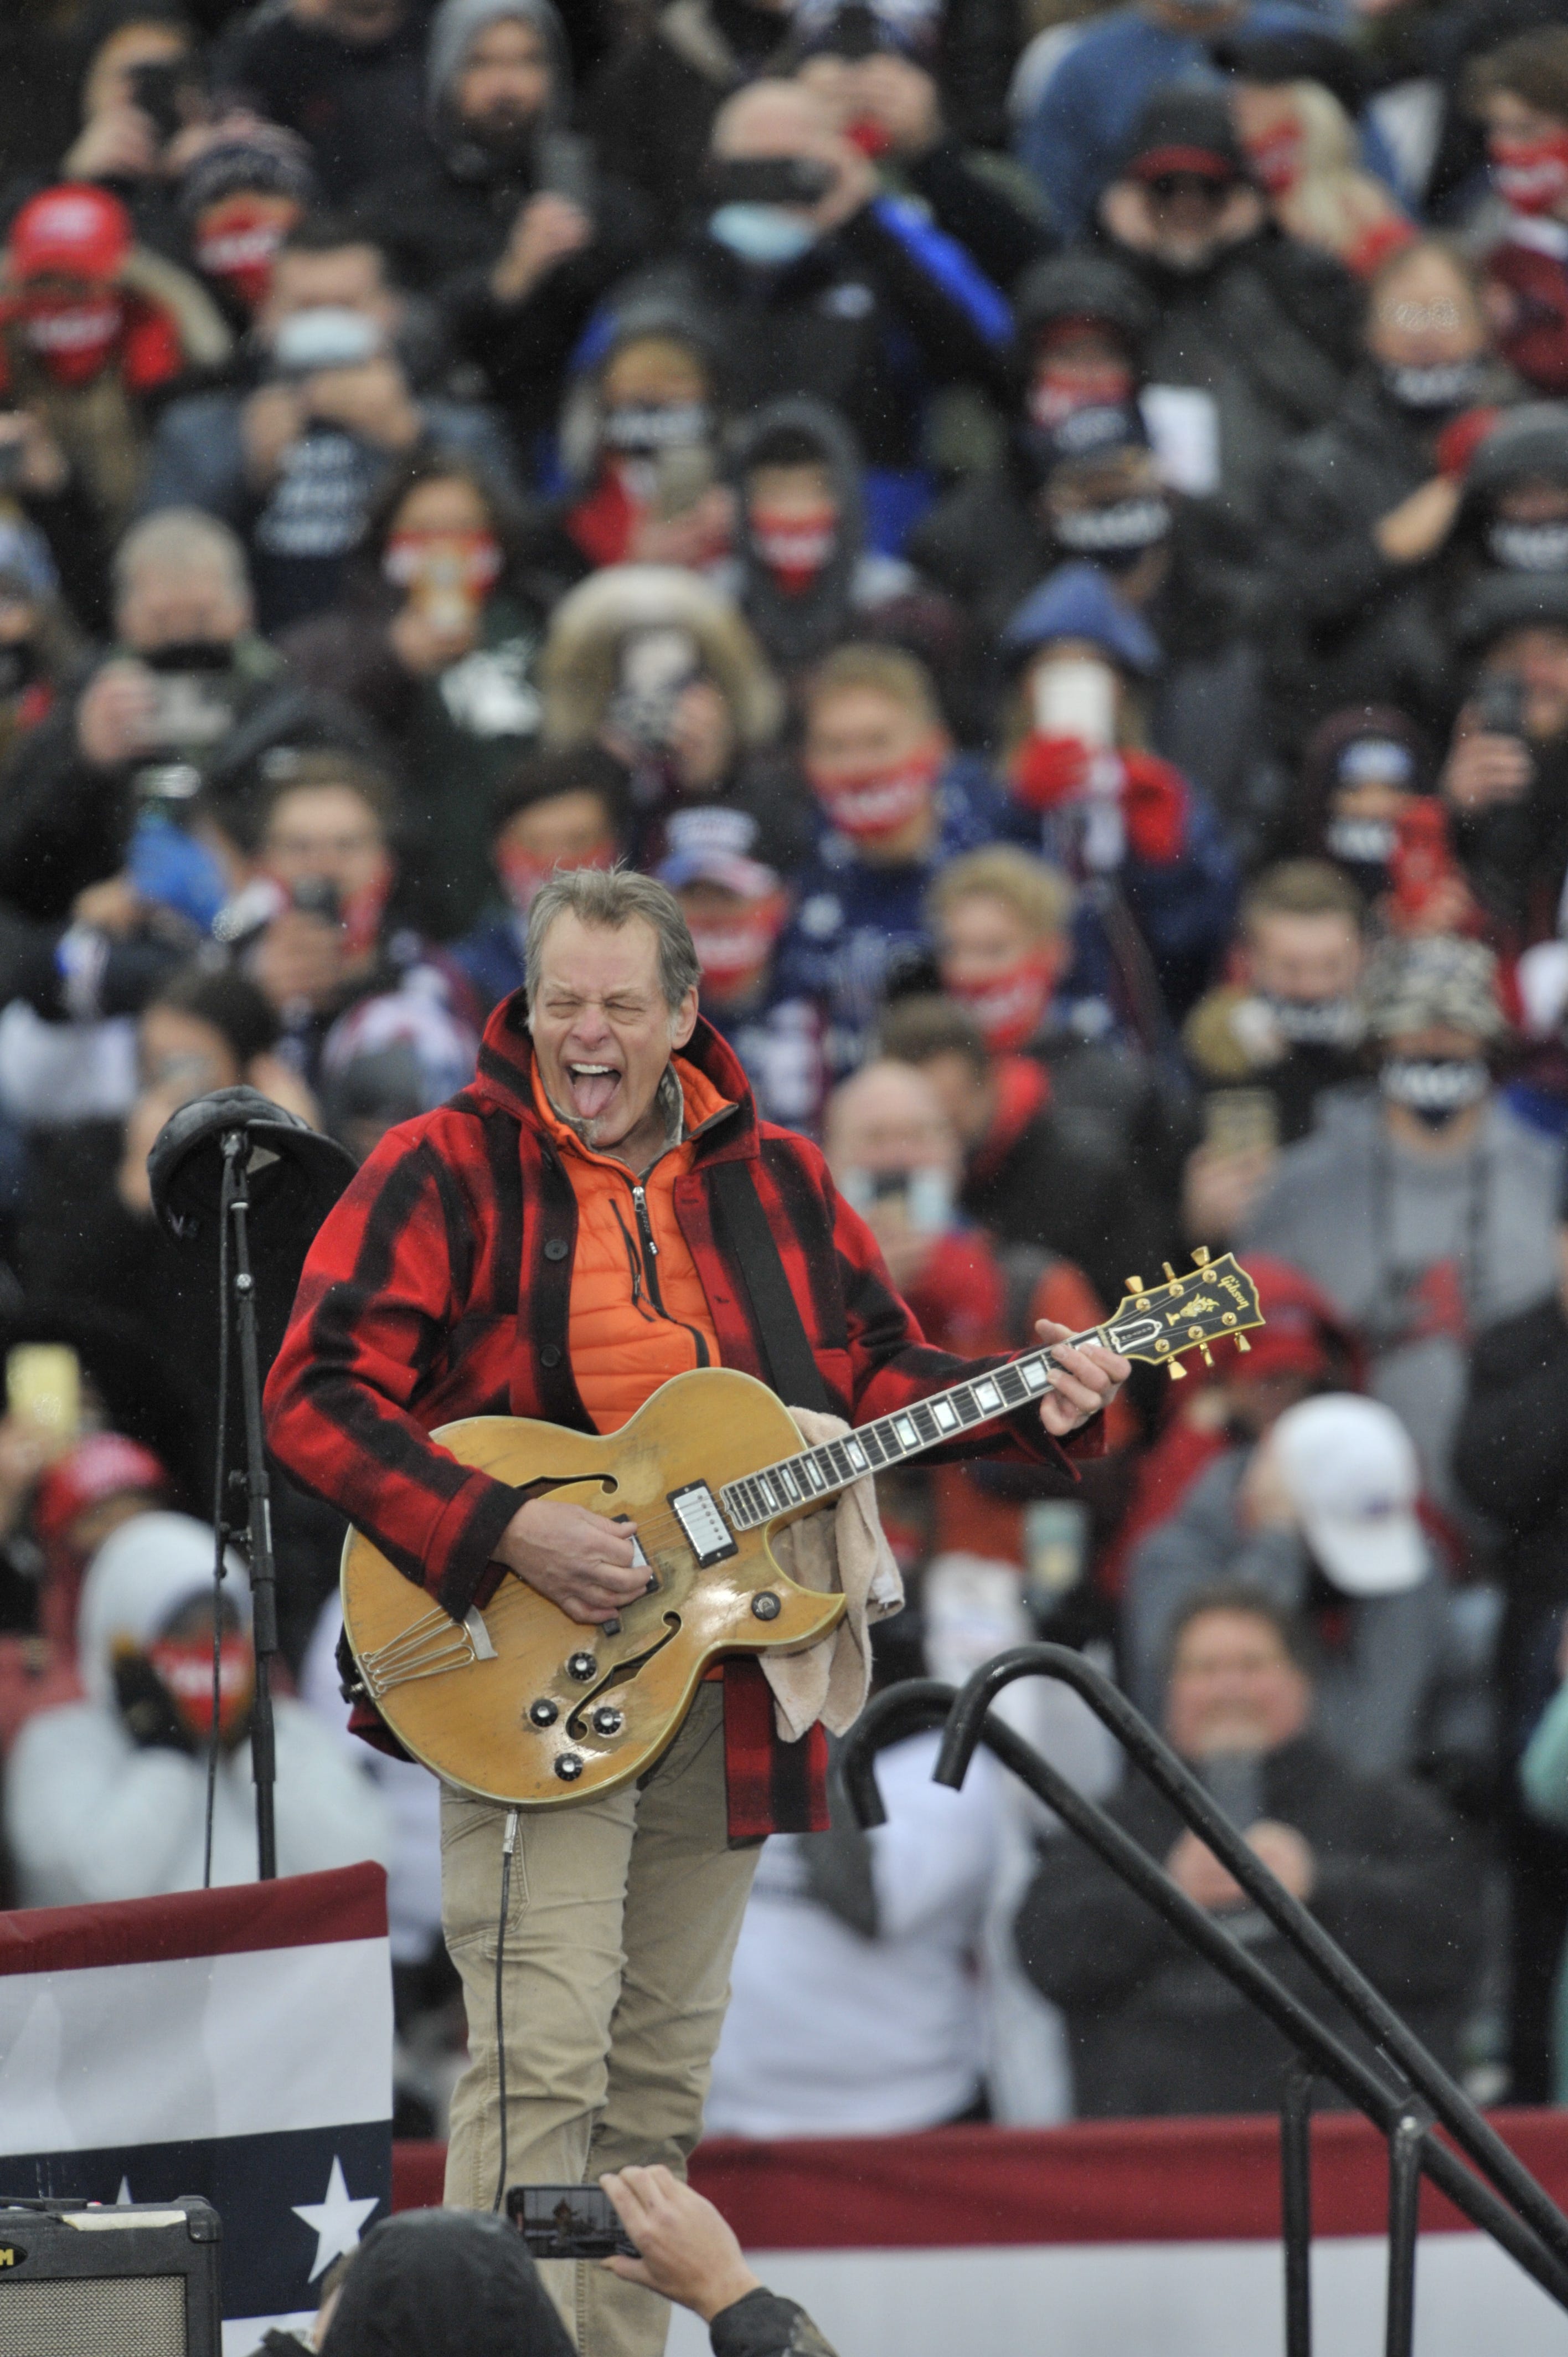 Ted Nugent plays The National Anthem before President Donald Trump addresses supporters during his Make America Great Again Victory Rally at AV Flight at the Capital Region International Airport in Lansing, Tuesday, October 27, 2020.